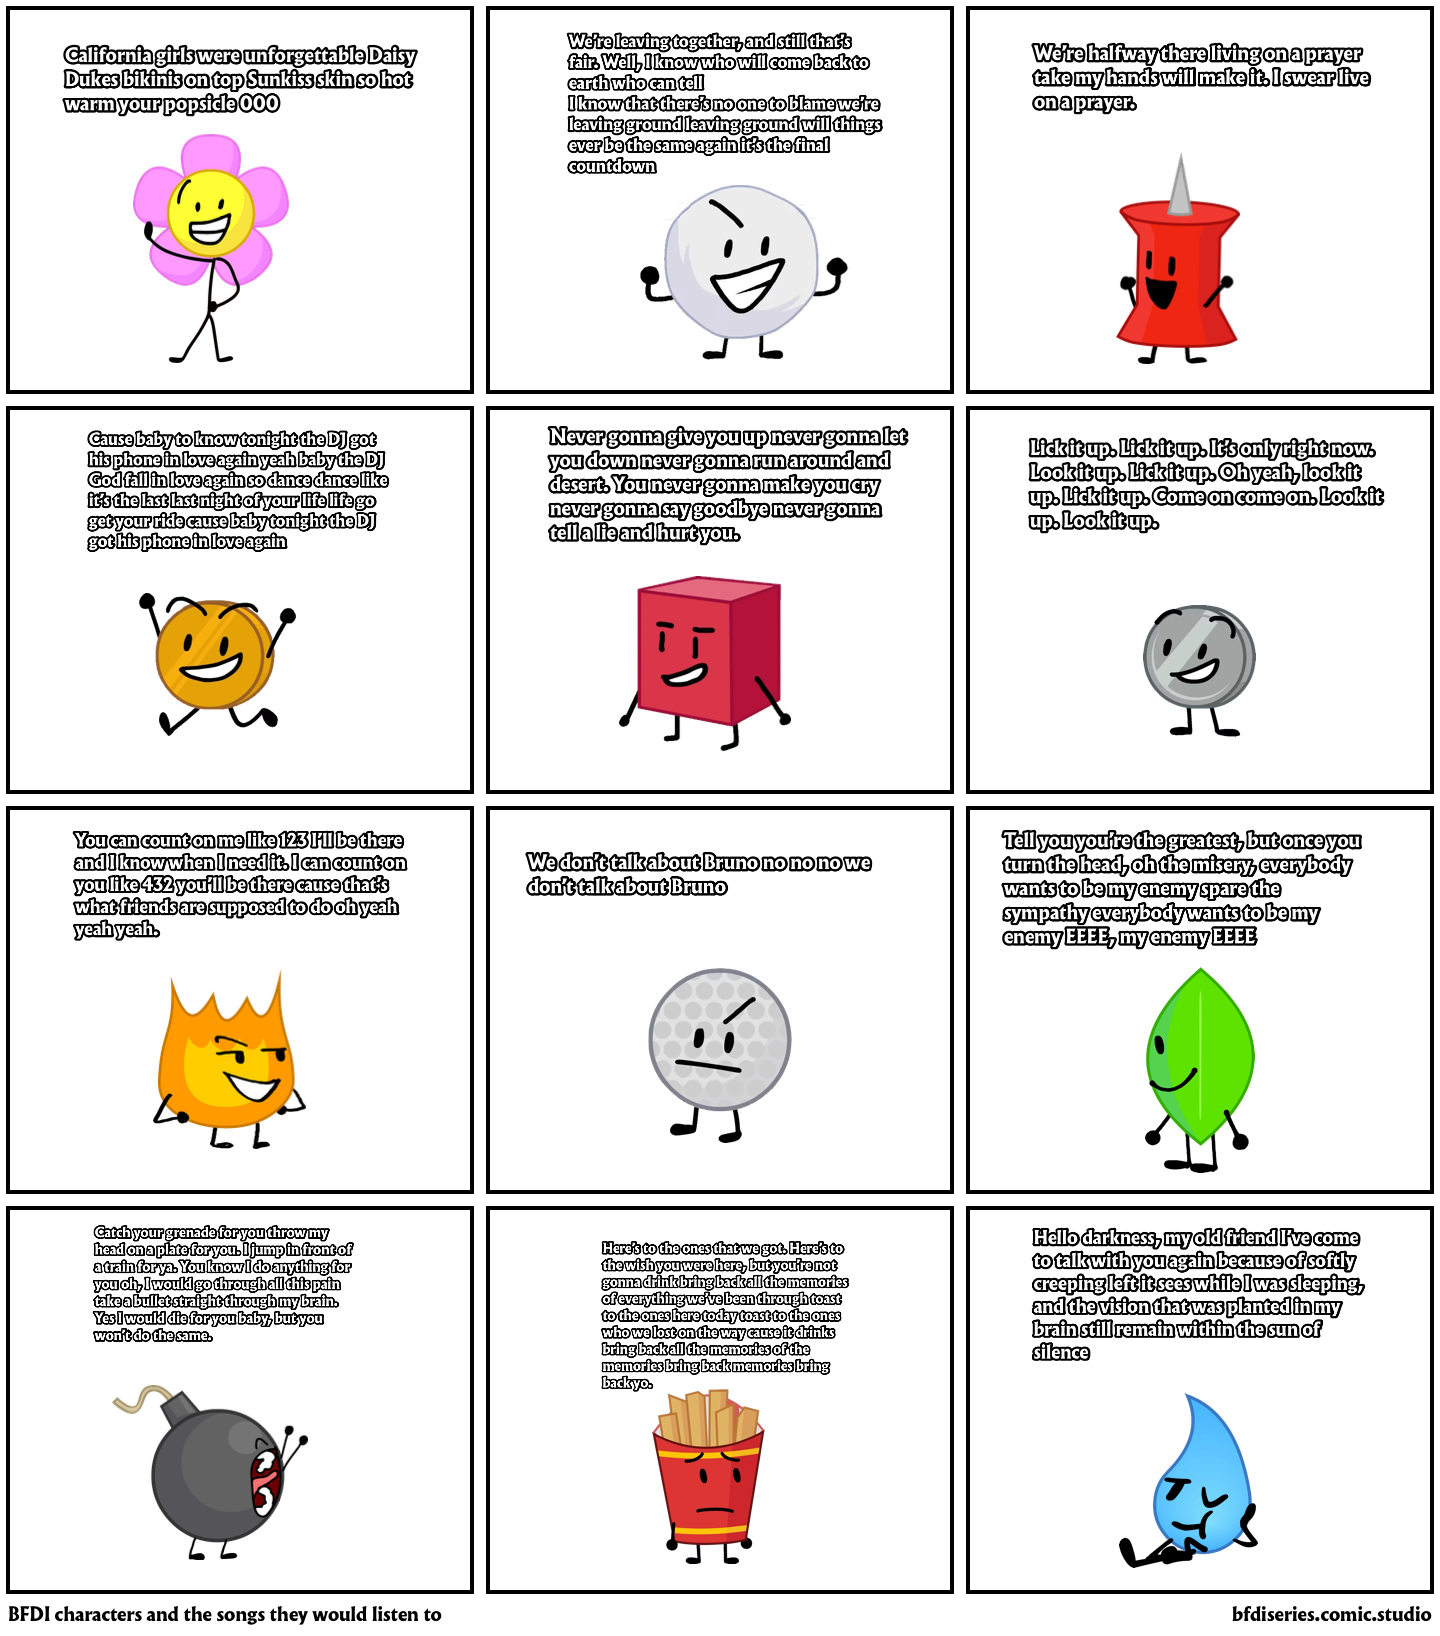 BFDI characters and the songs they would listen to